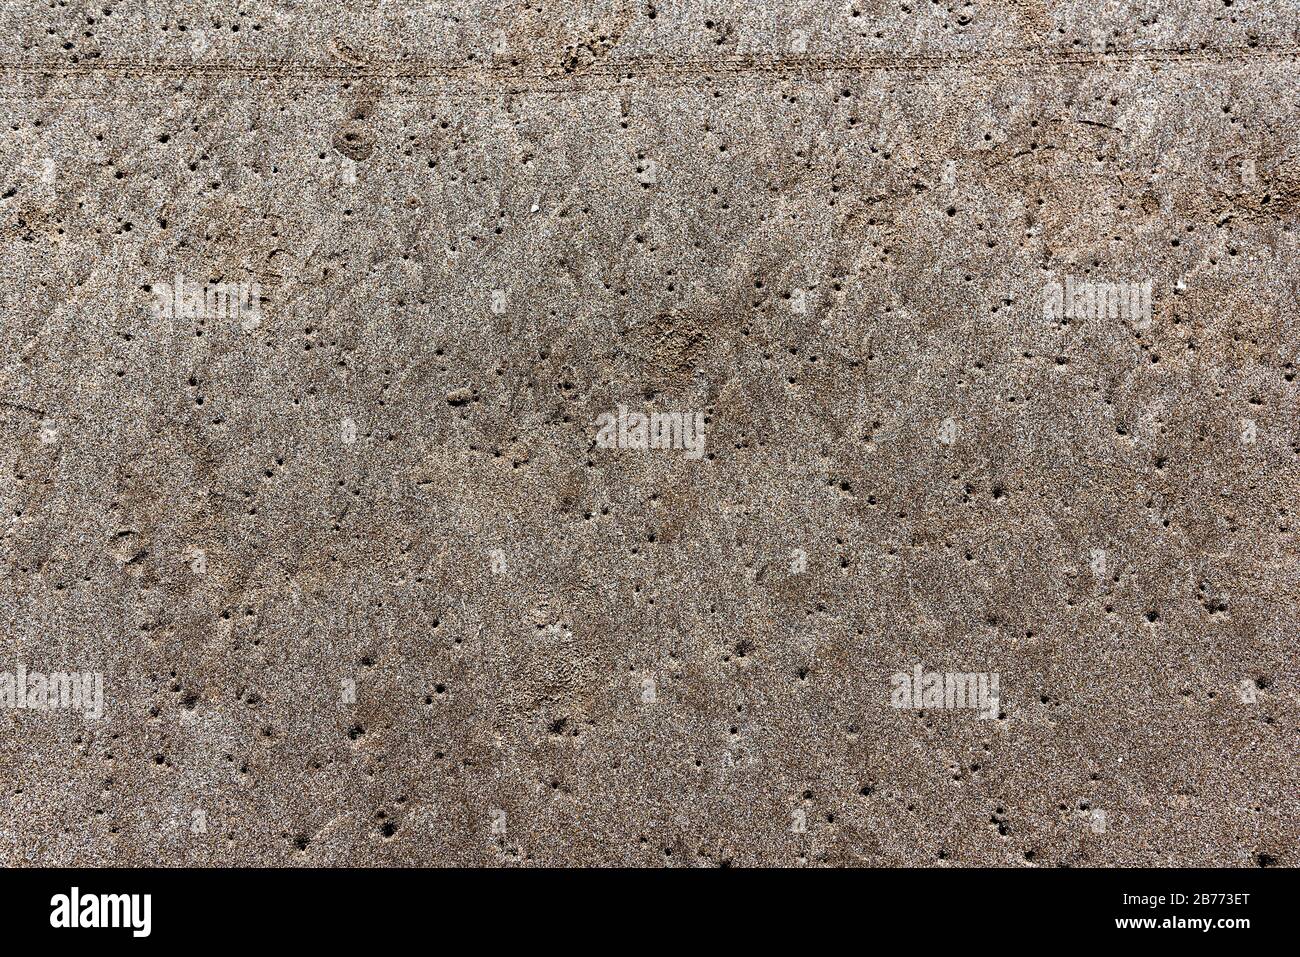 Full frame of sand full of tiny holes made by clams Stock Photo